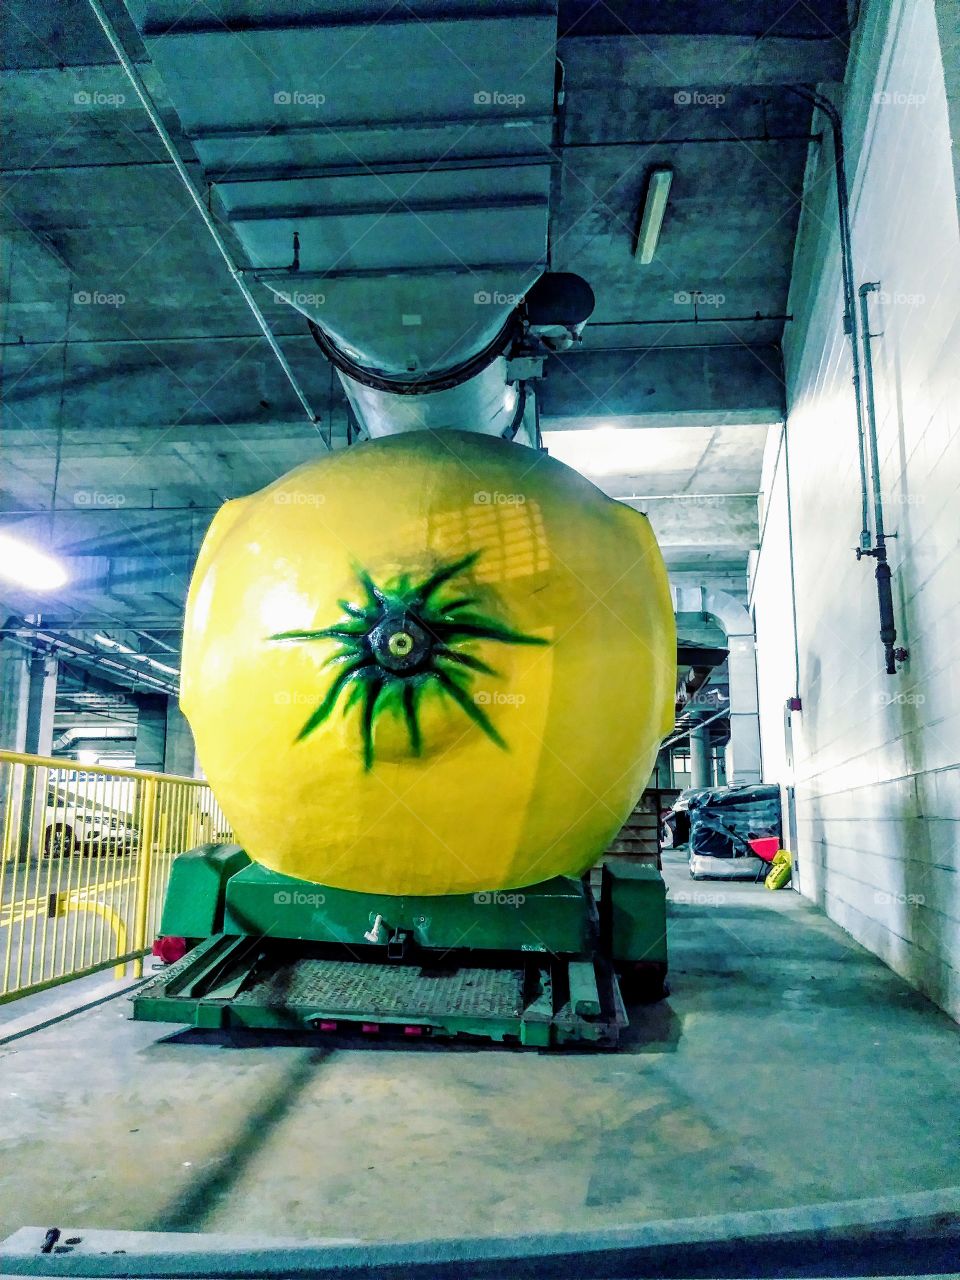 giant lemon! I assume its a vendor's trailer of some sort. York Street downtown Jersey City New Jersey.